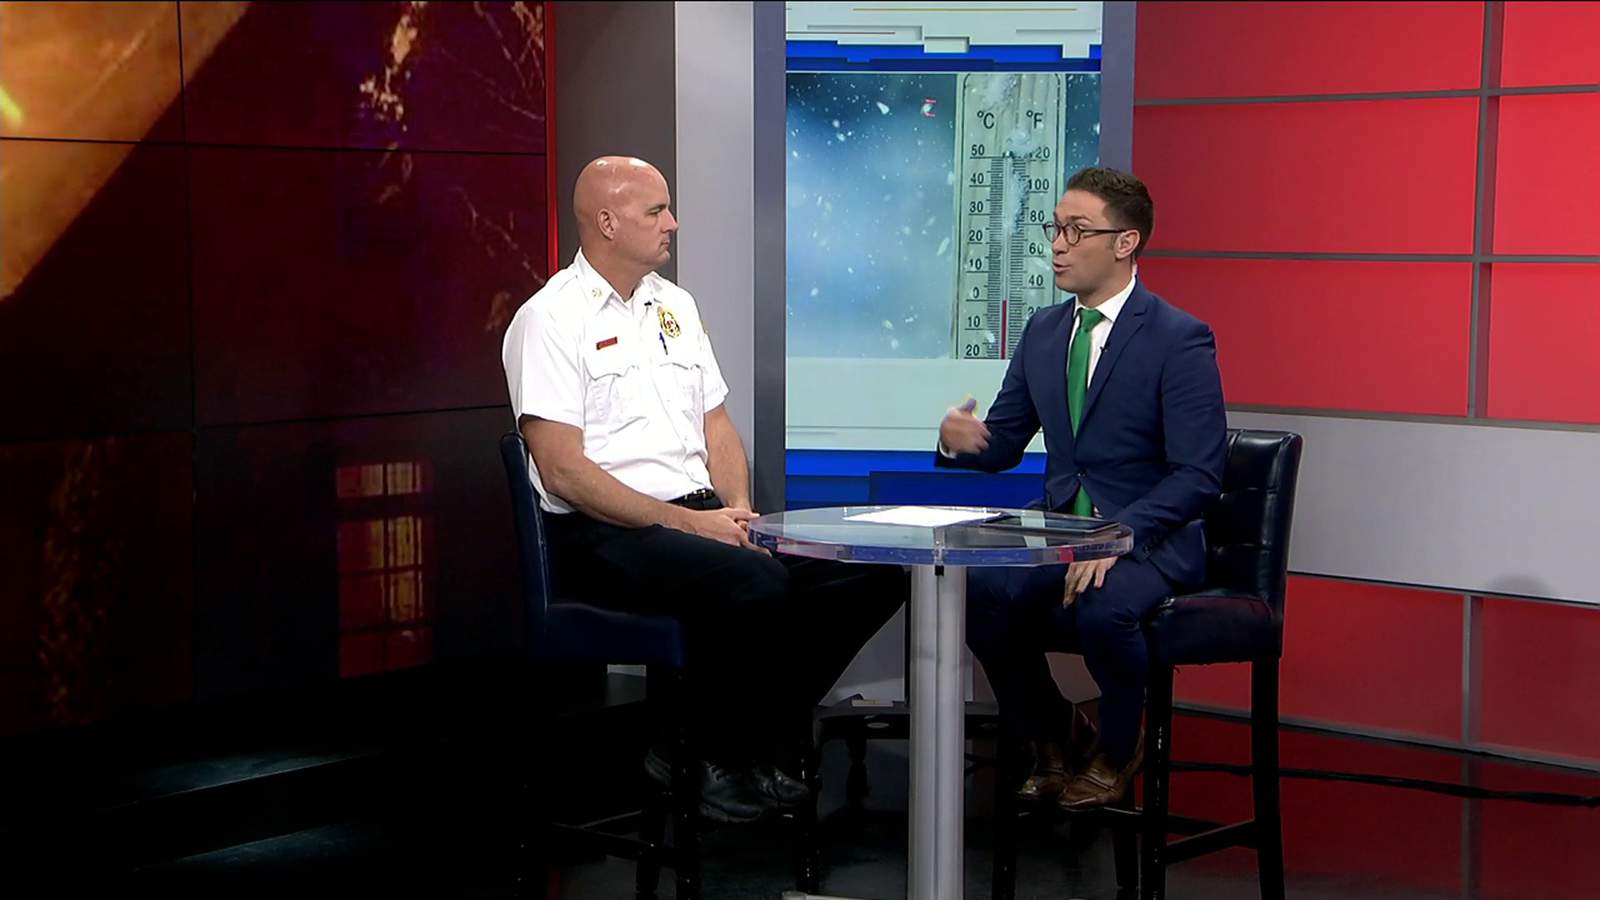 JFRD Chief Keith Powers talks to us about fire safety during the winter